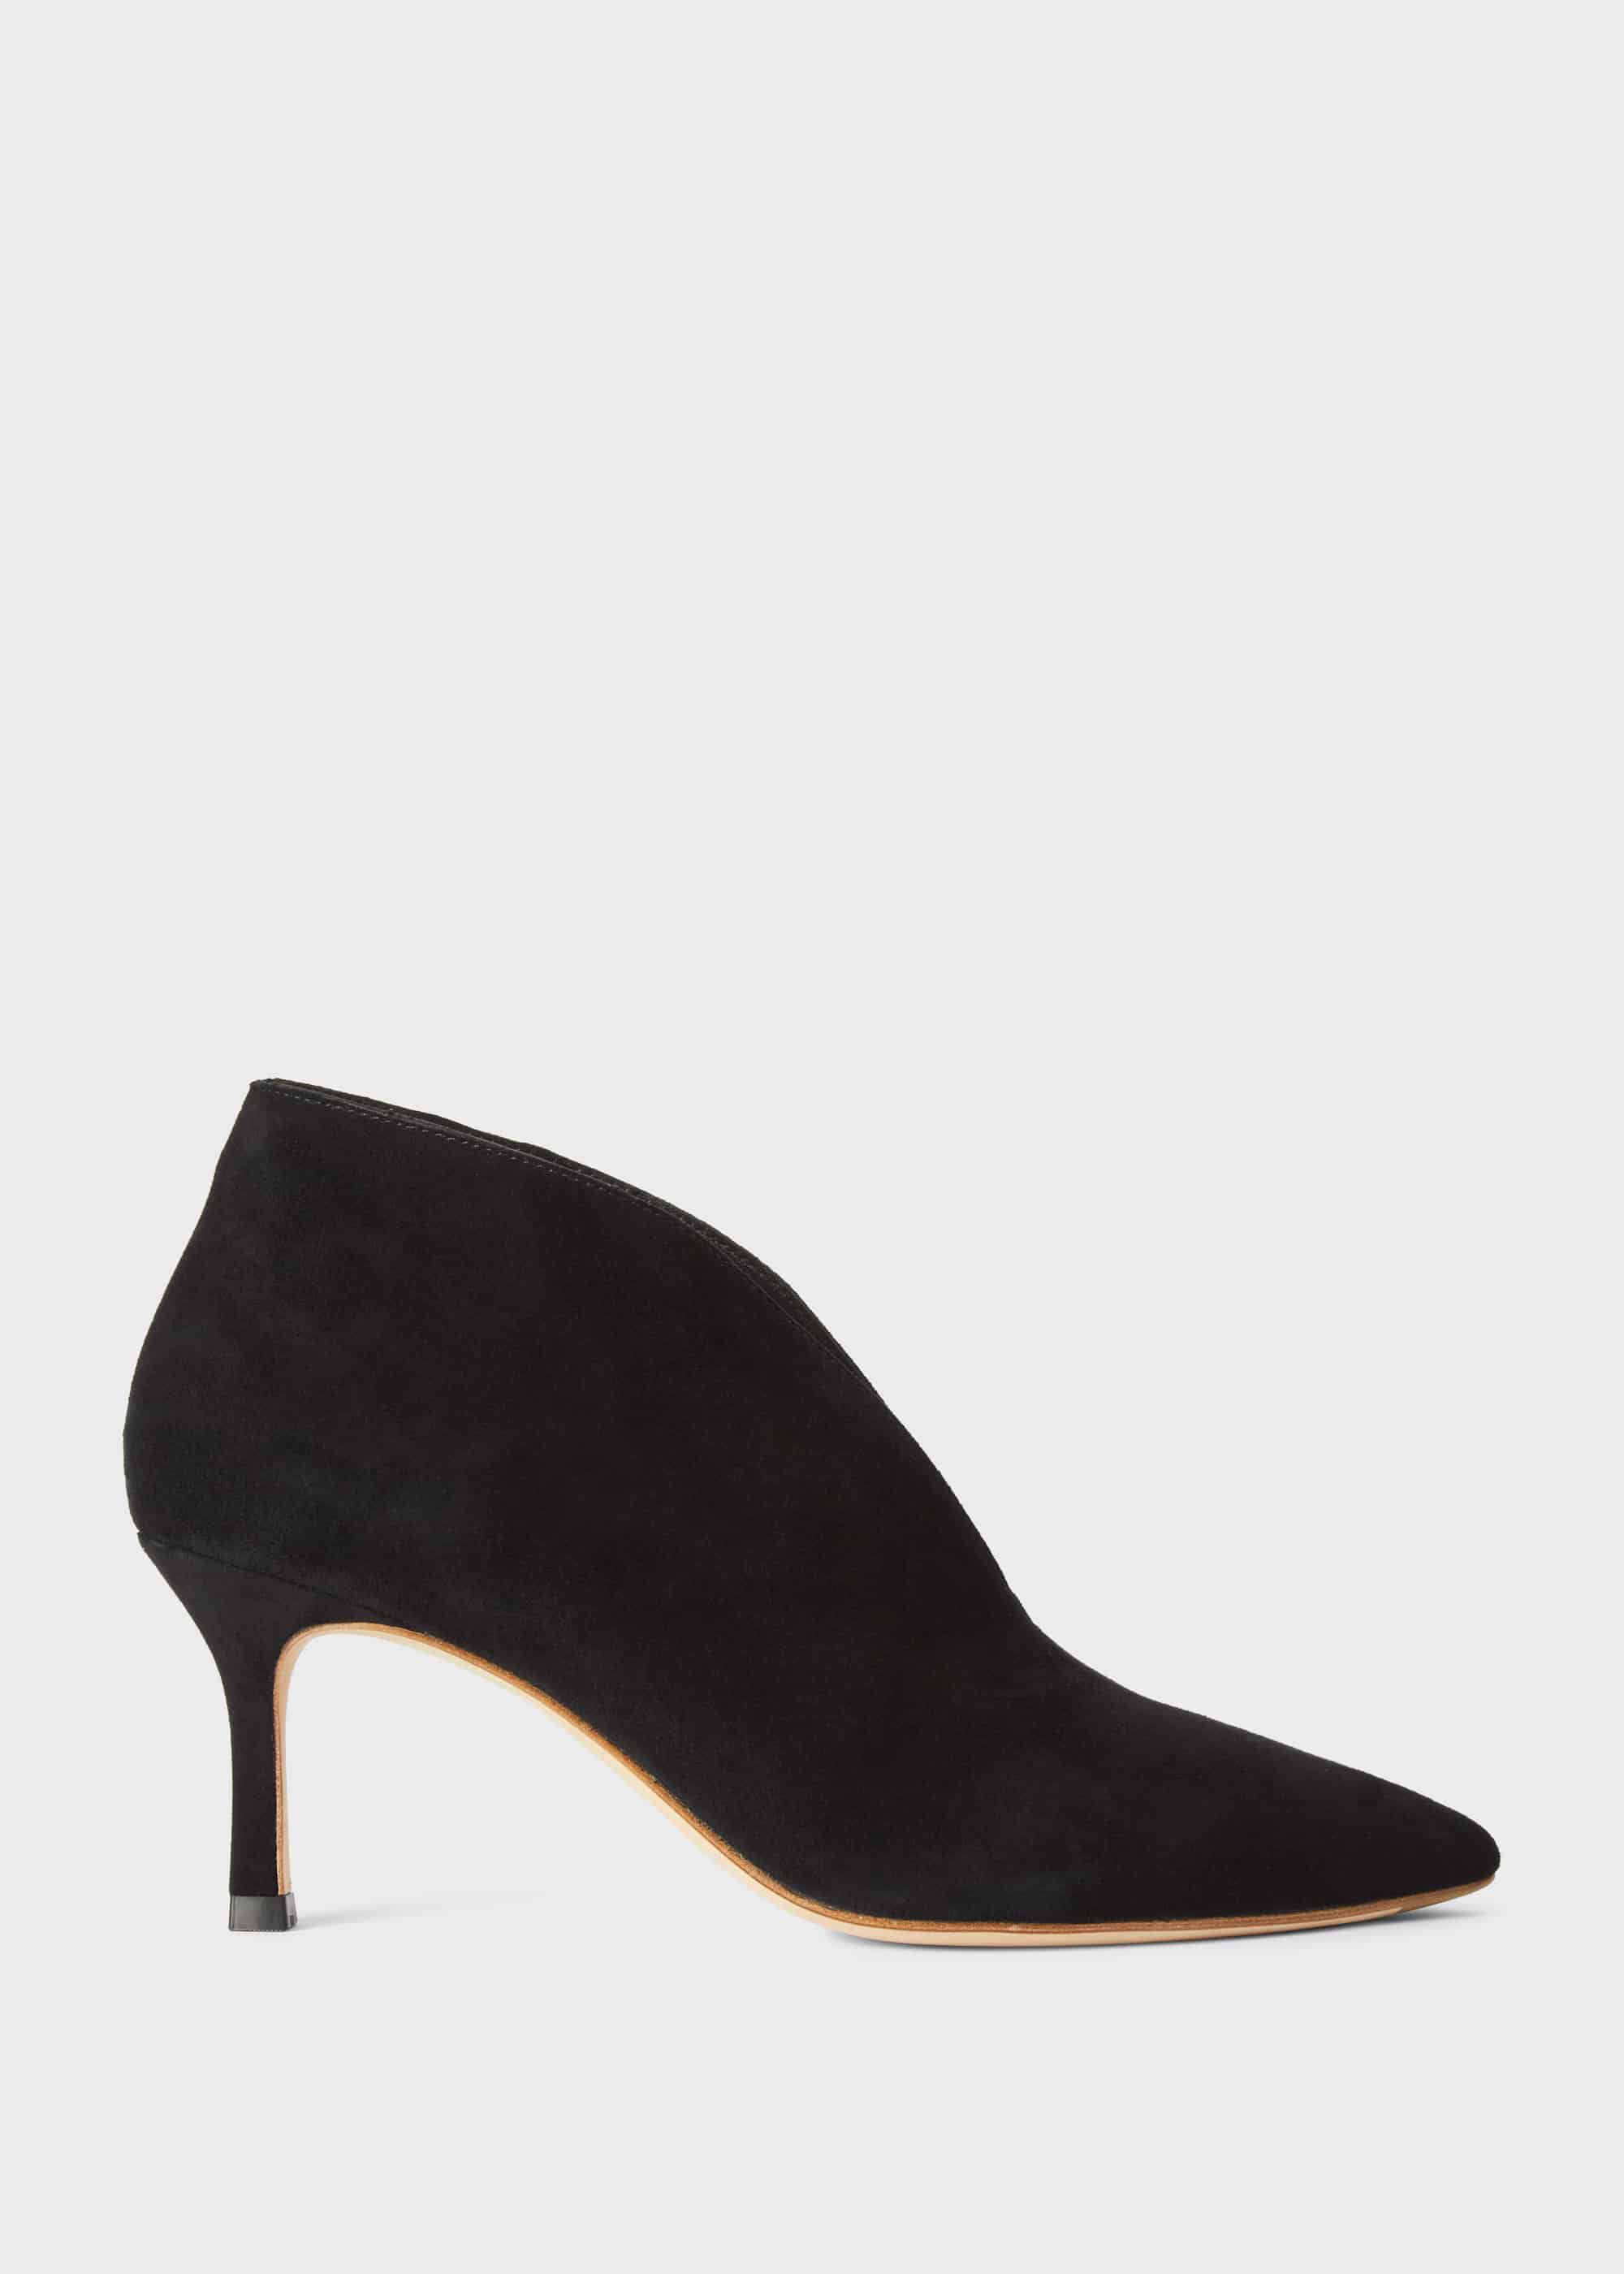 ankle booties stiletto